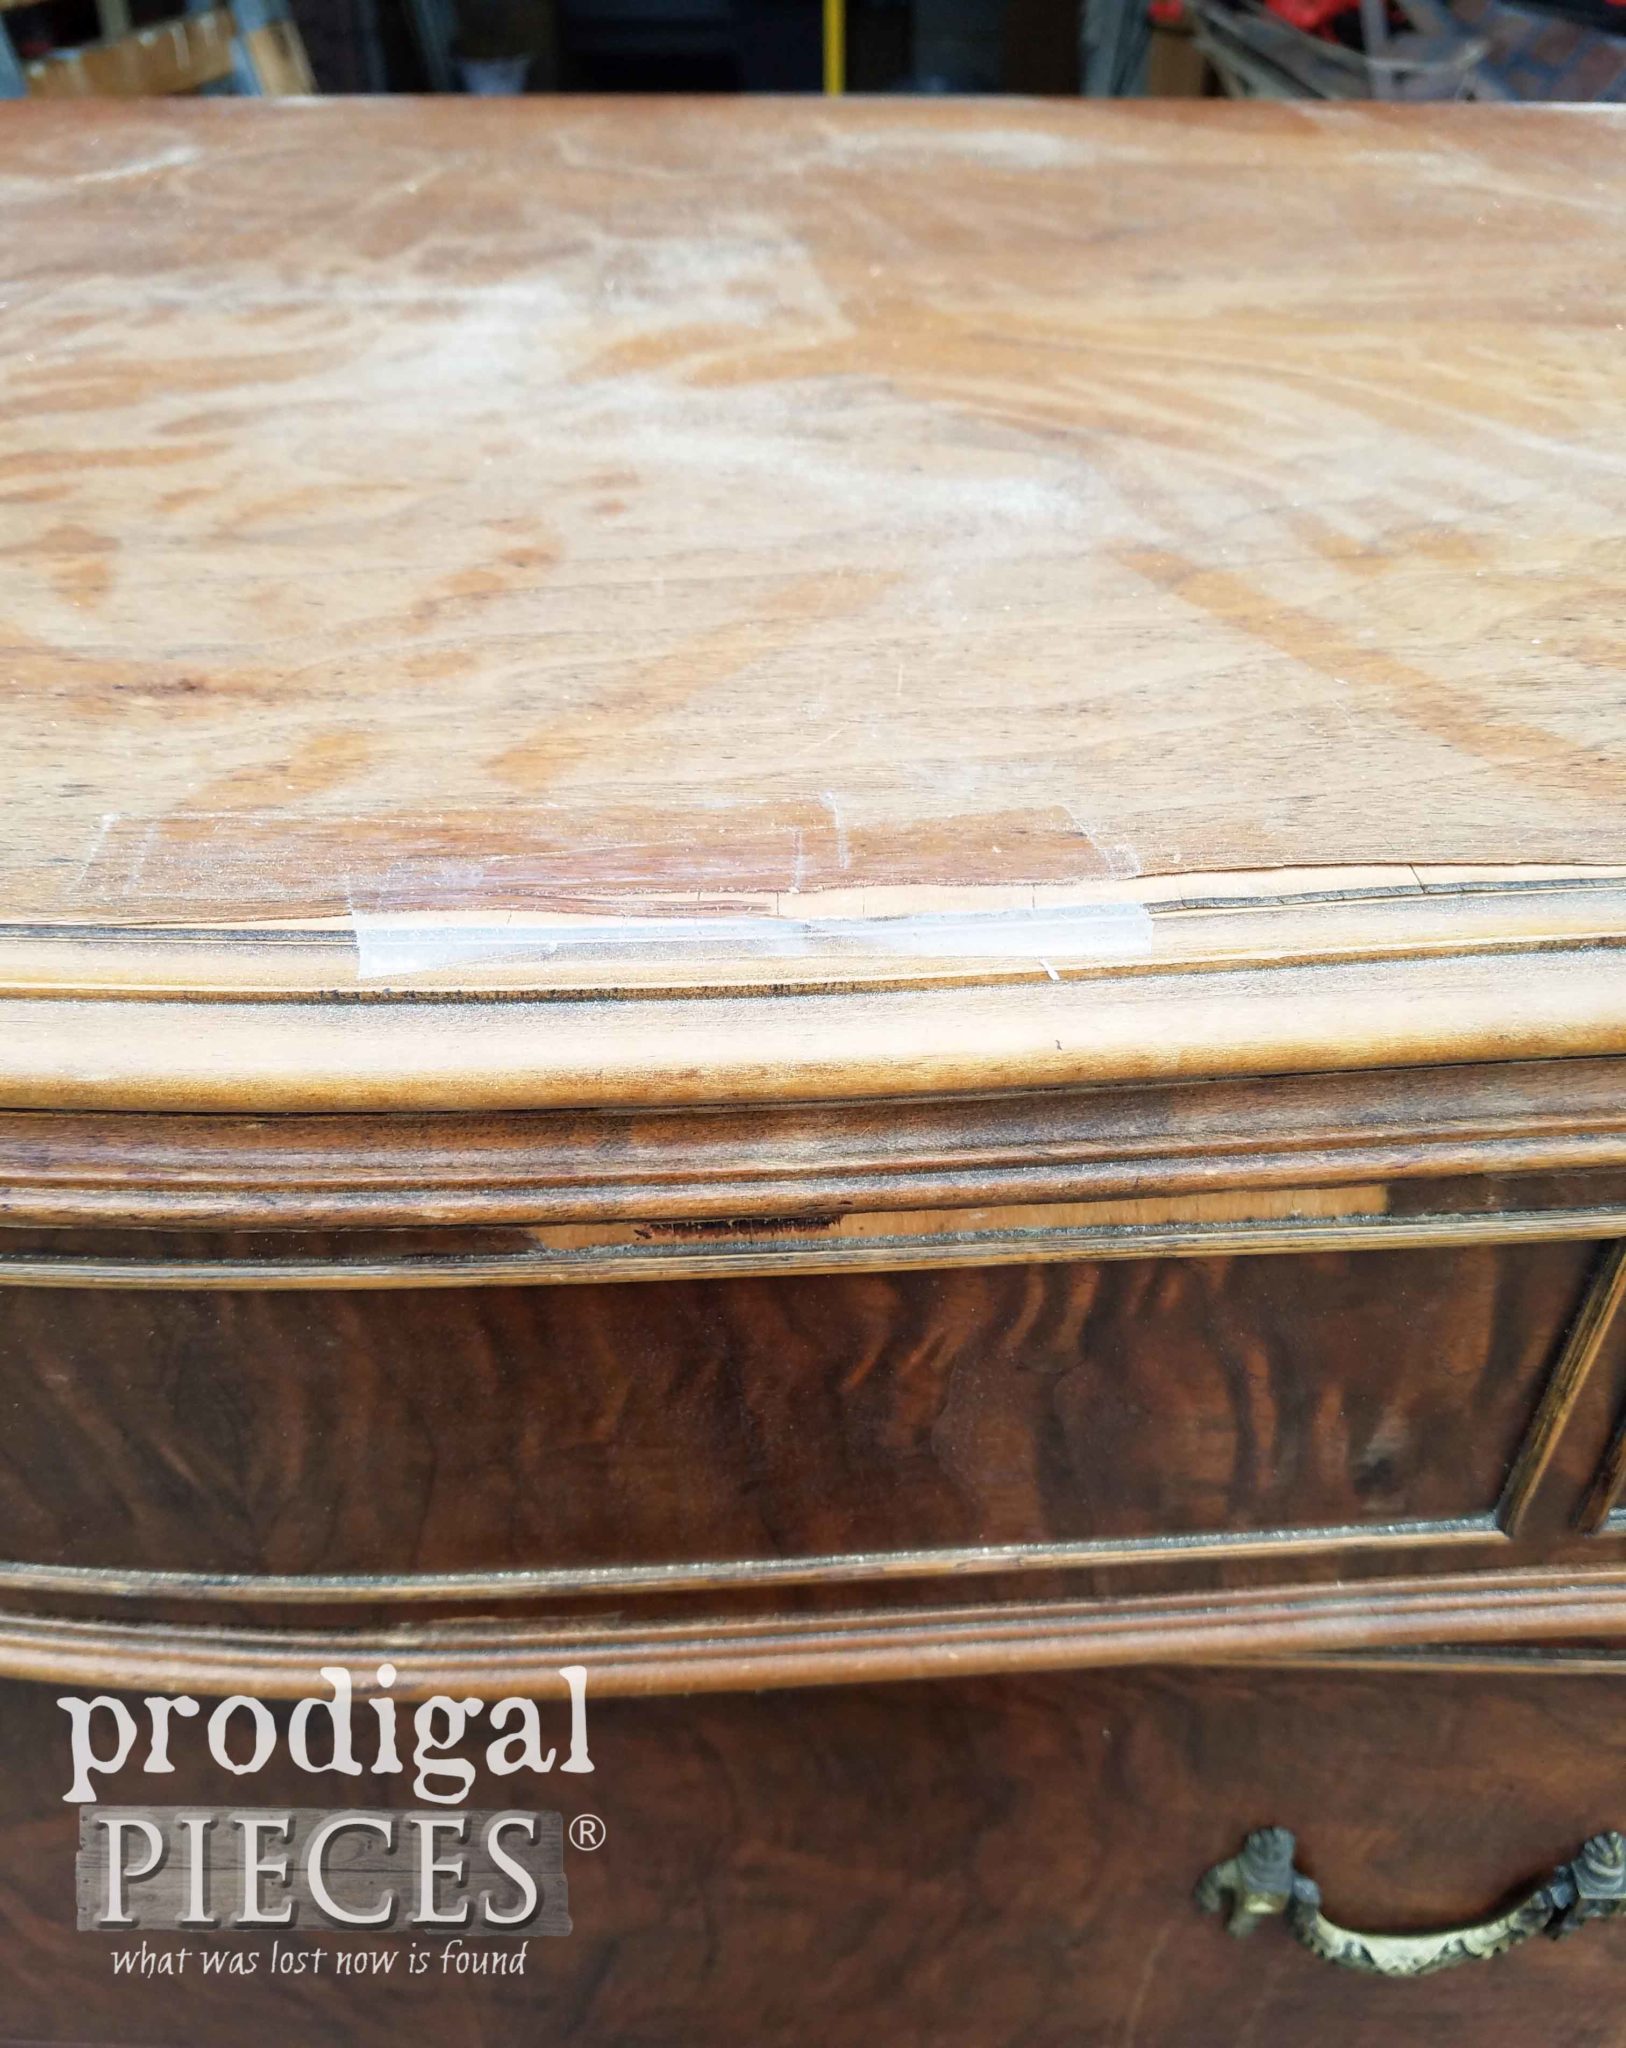 Taped Damaged Veneer on Antique Chest of Drawers | prodiglapieces.com